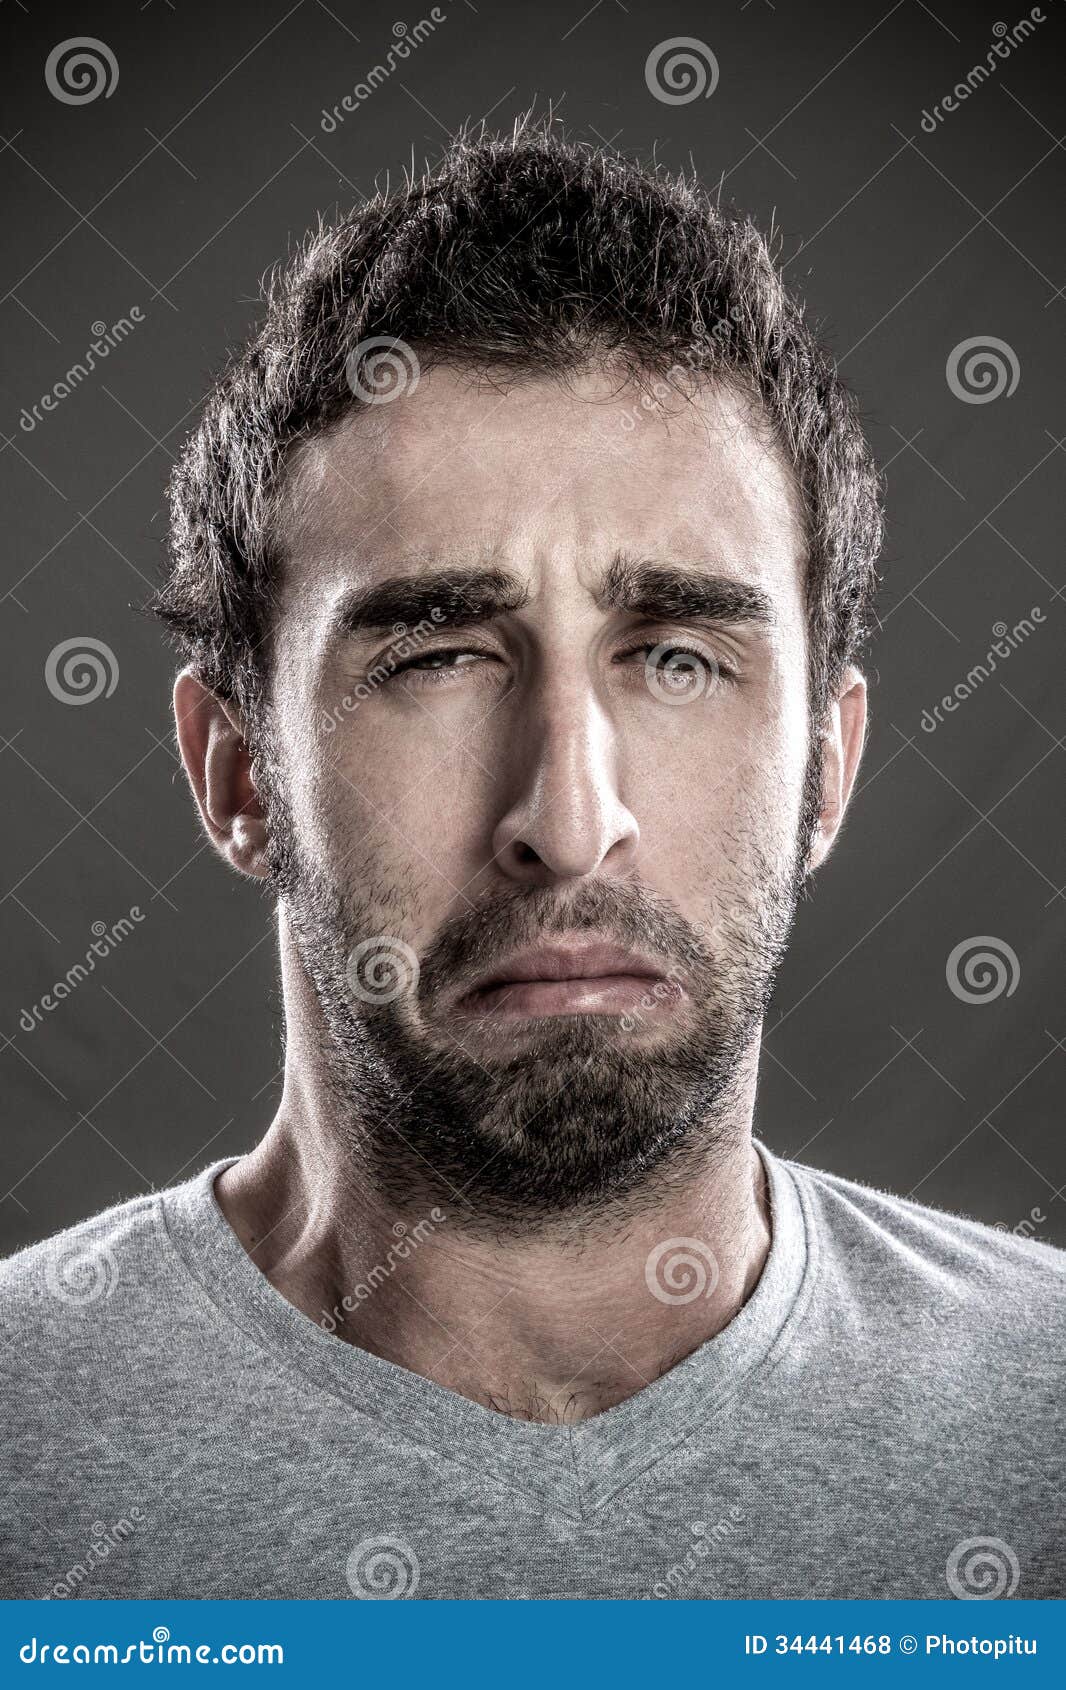 Man crying stock photo. Image of culture, black, expressing - 34441468